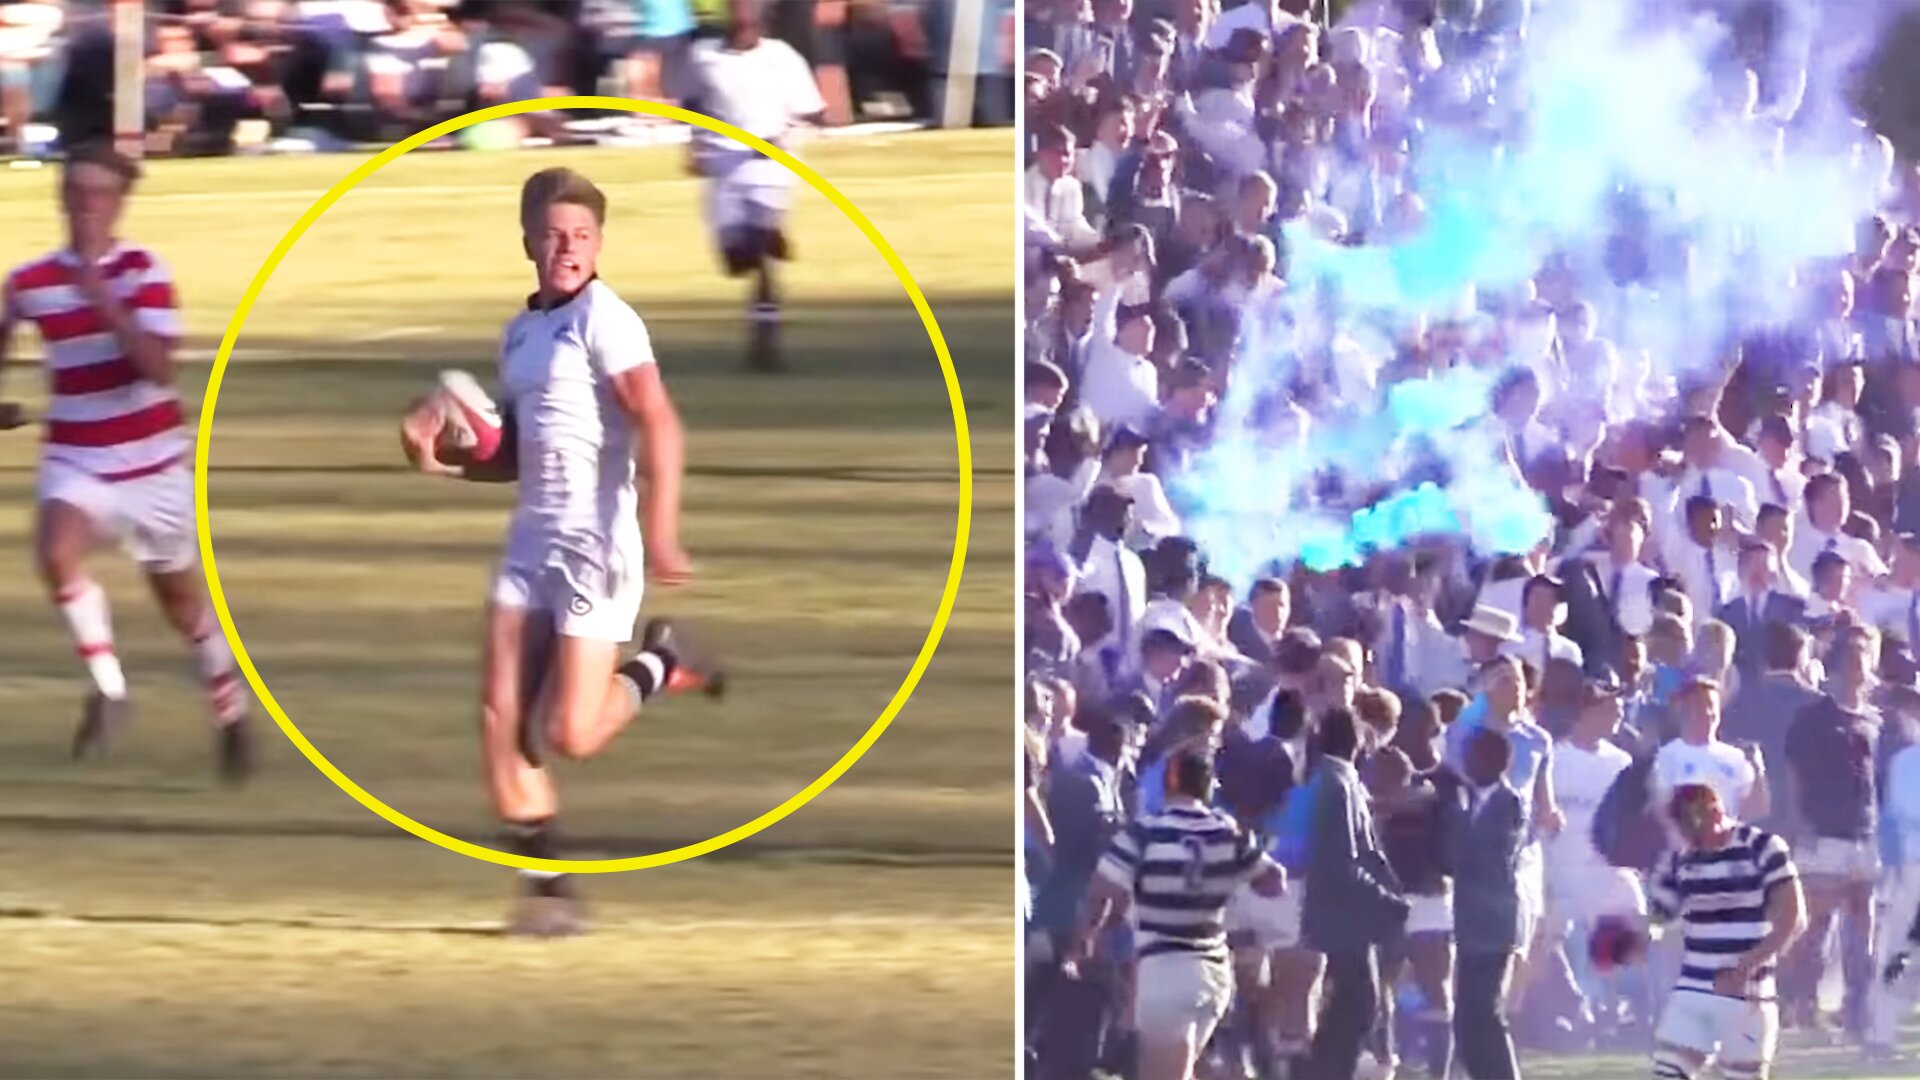 Spine-tingling new video shows just how crazy schoolboy rugby is in South Africa